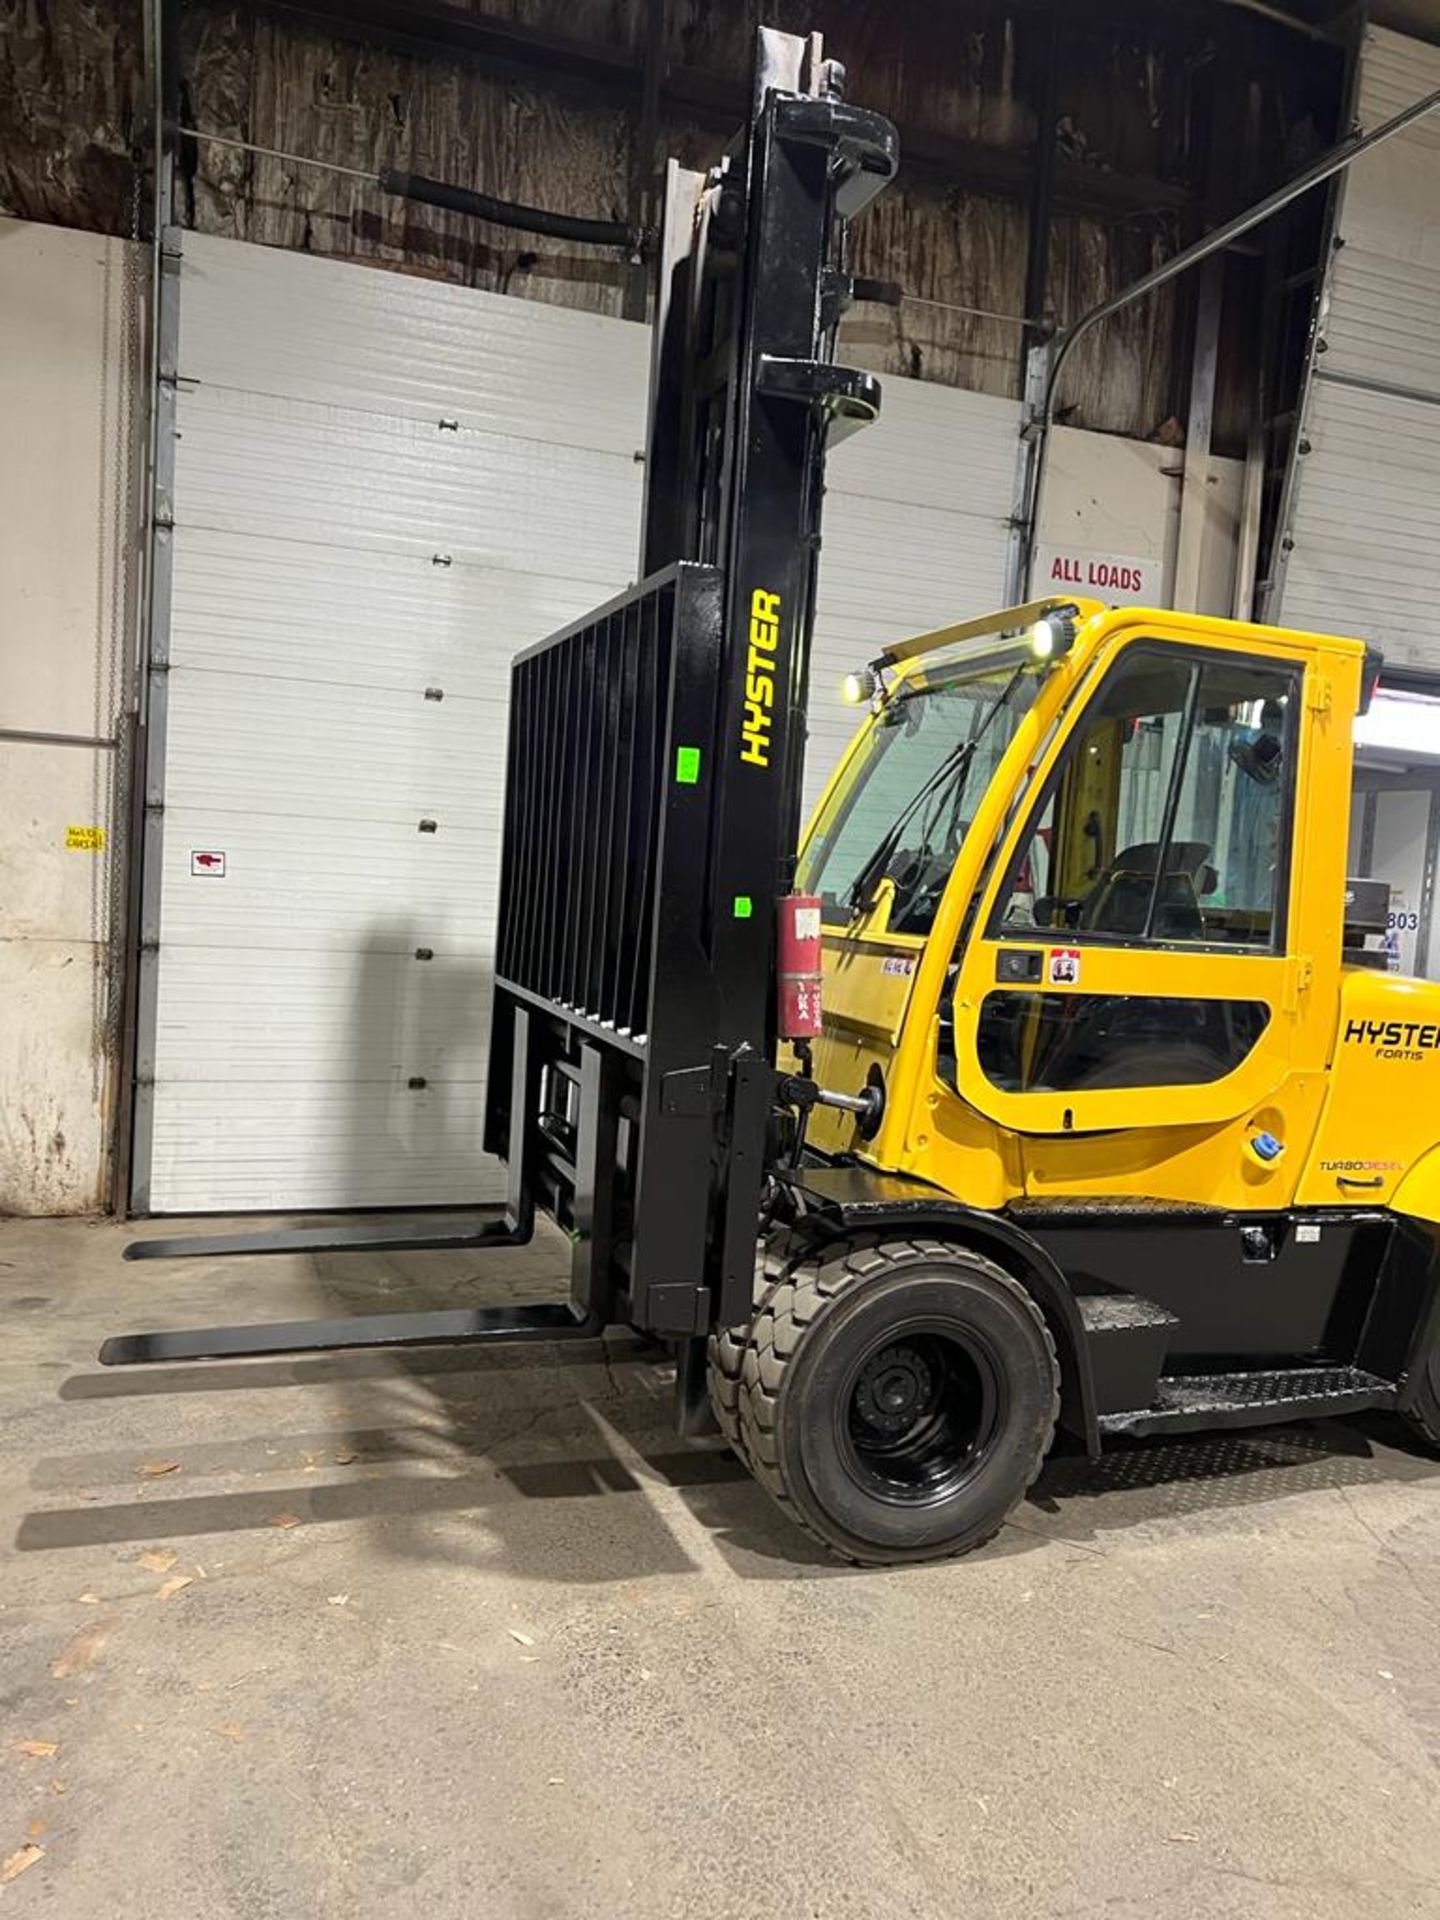 NICE 2017 Hyster model 155 - 15,500lbs Capacity OUTDOOR Forklift Diesel with CAB sideshift - Image 2 of 6